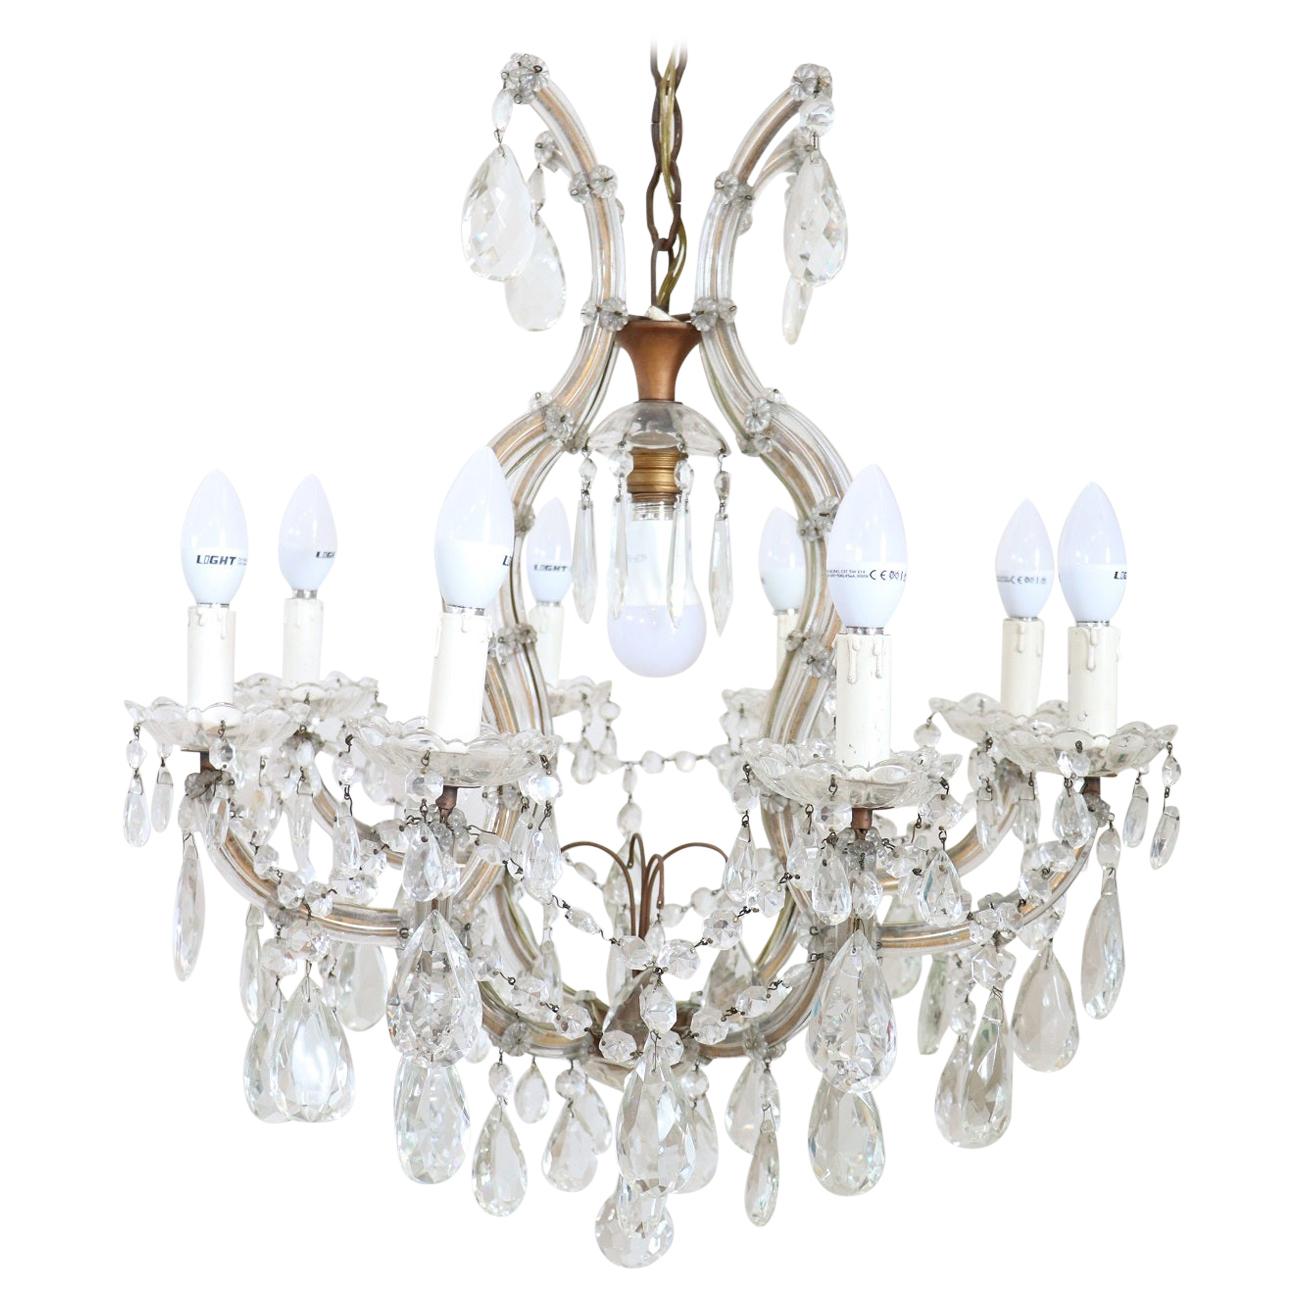 19th Century Italian Louis XVI Style Bronze and Crystals Chandelier